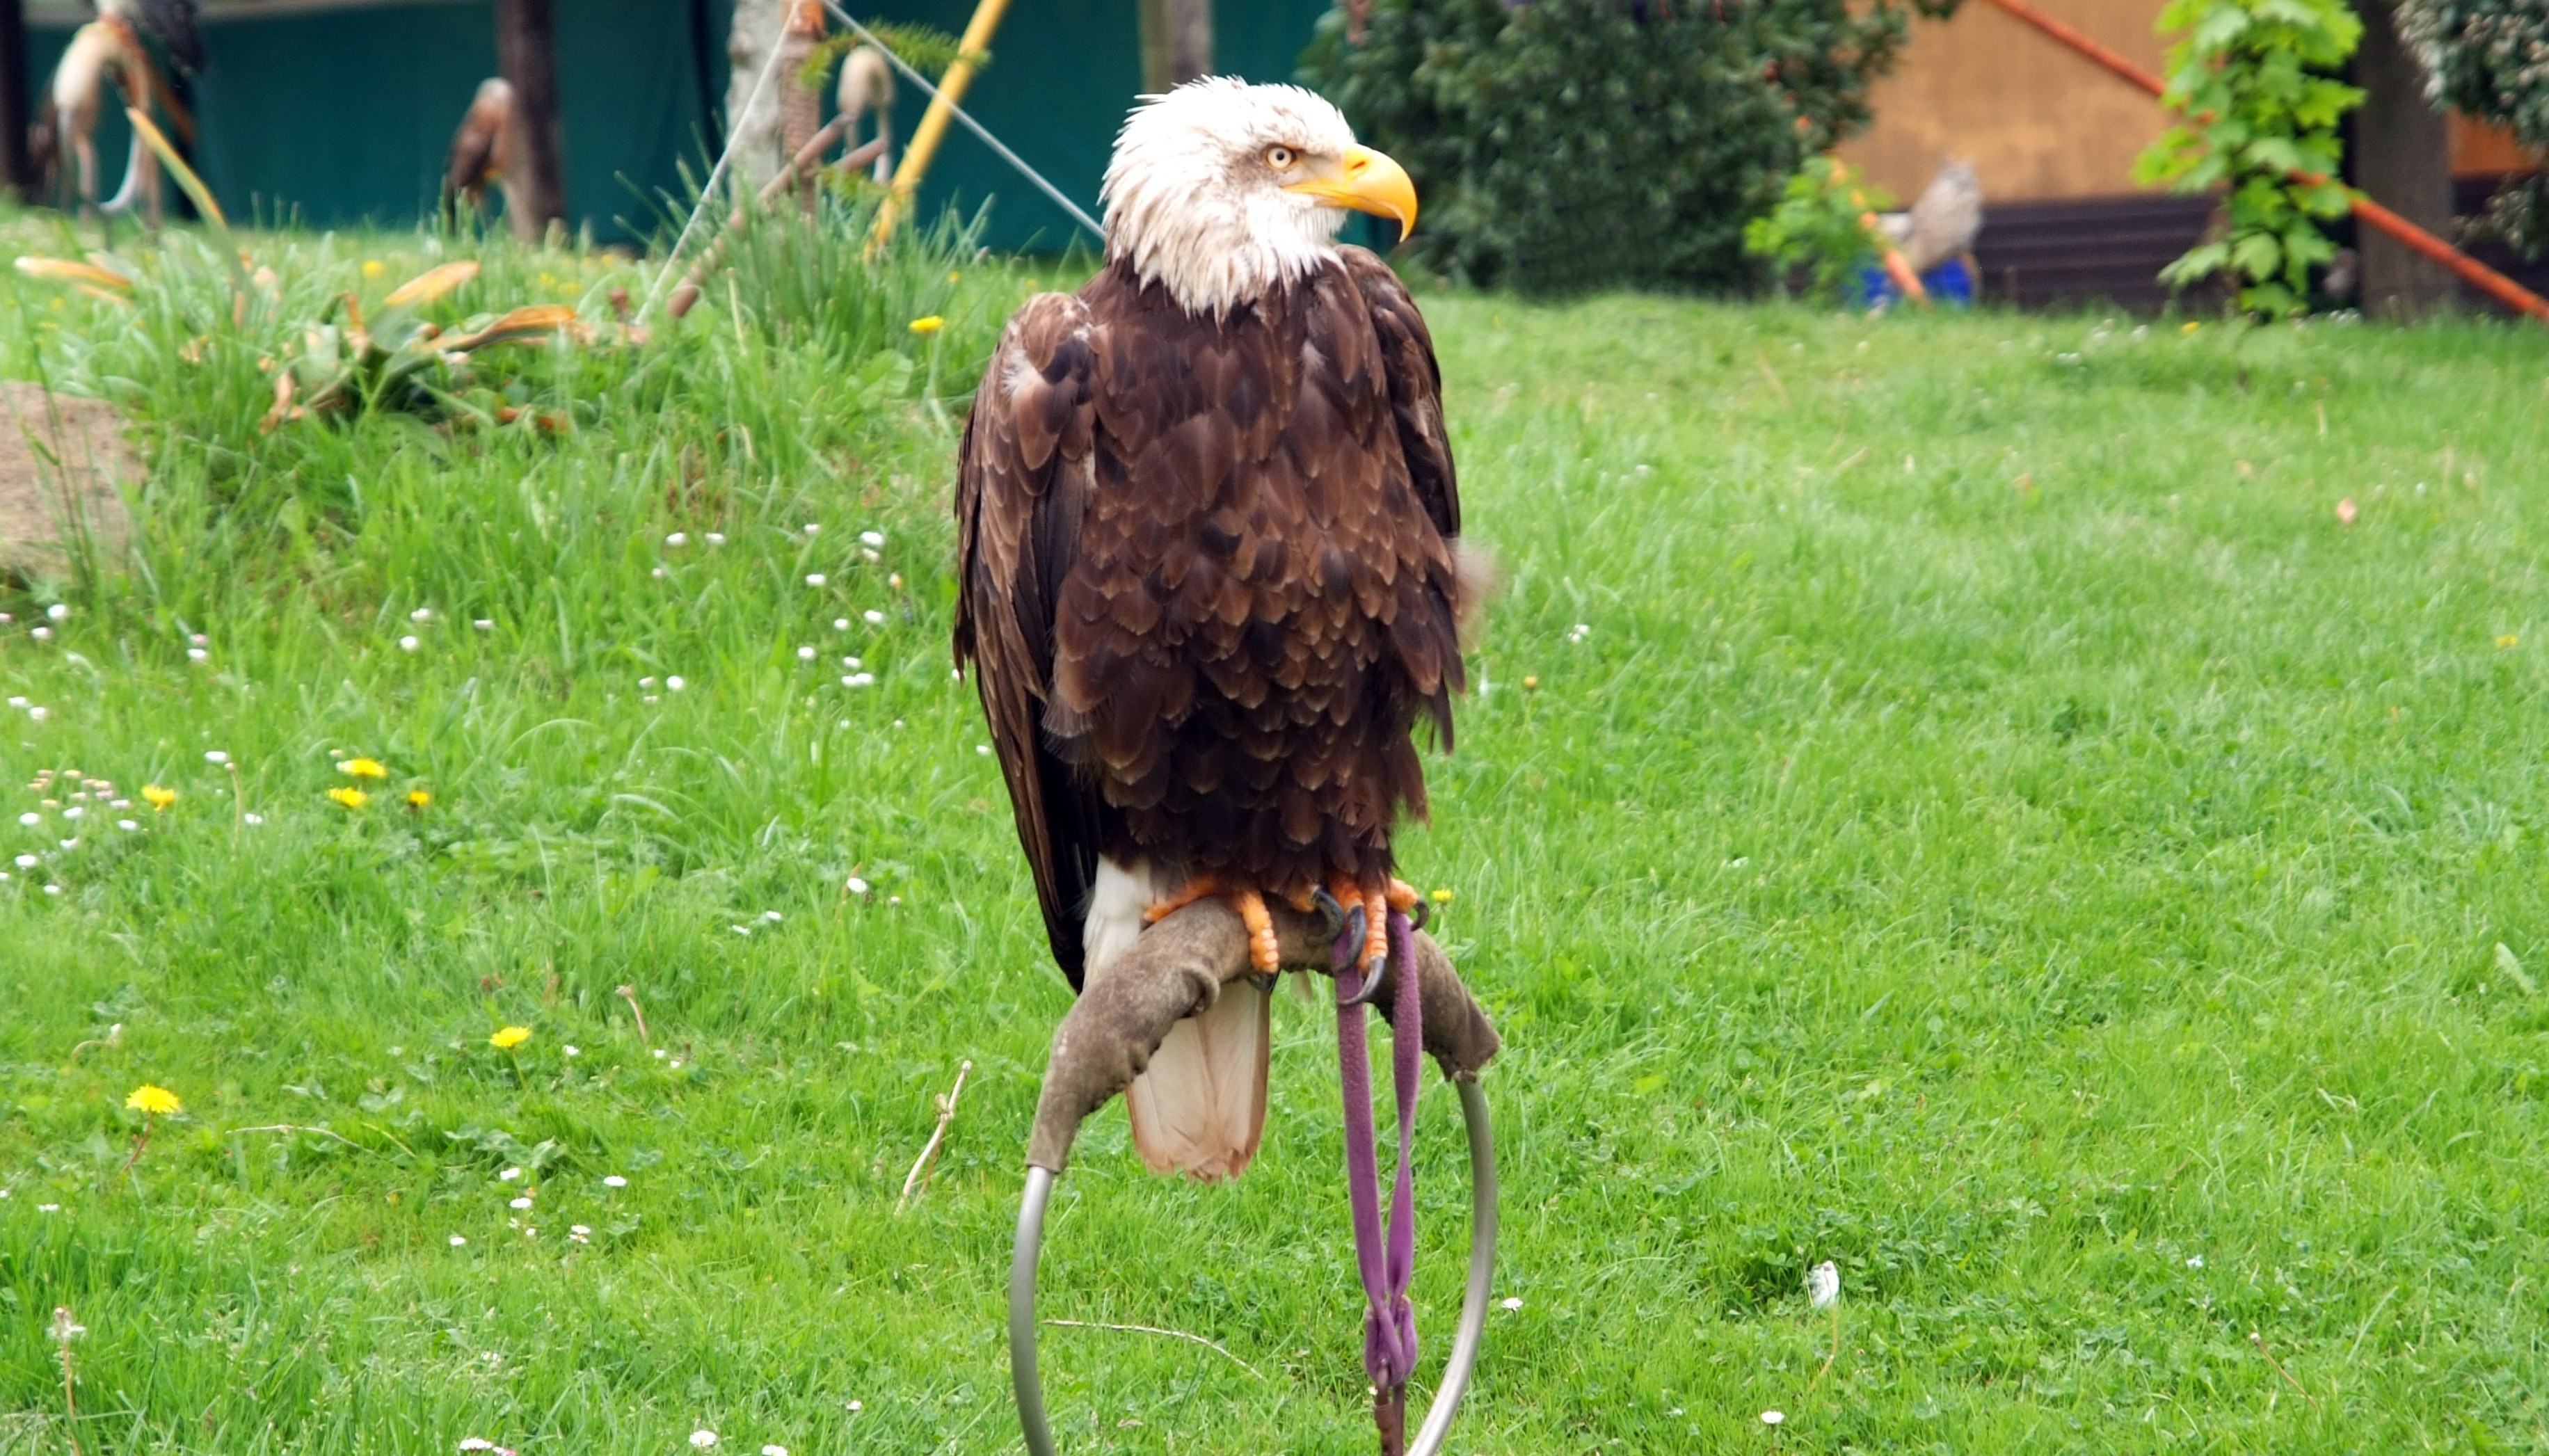 american bald eagle on brown wooden stand during daytime